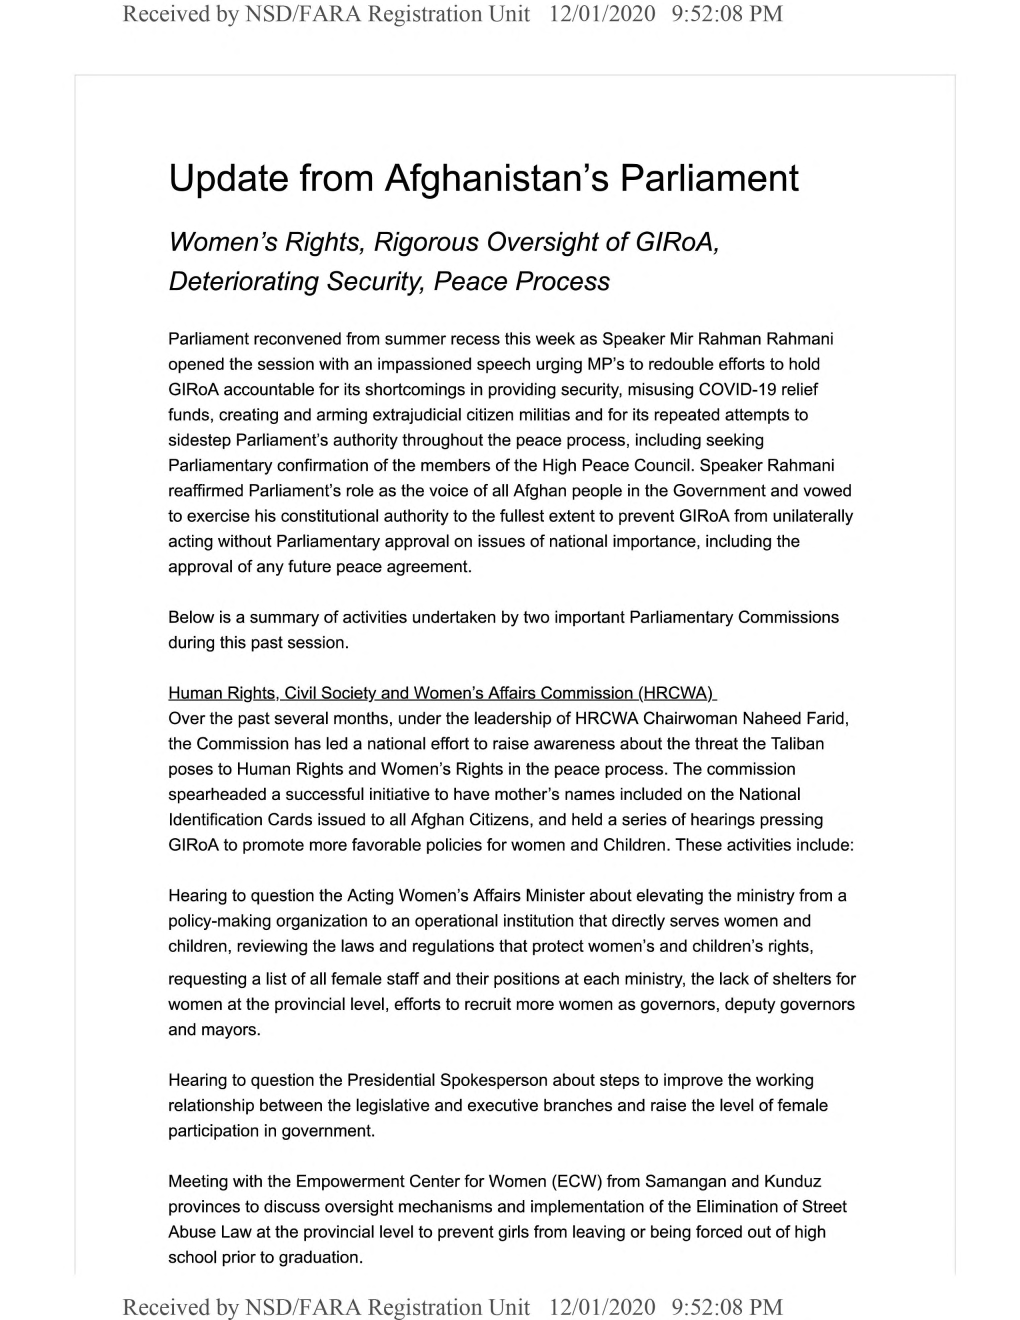 Update from Afghanistan's Parliament